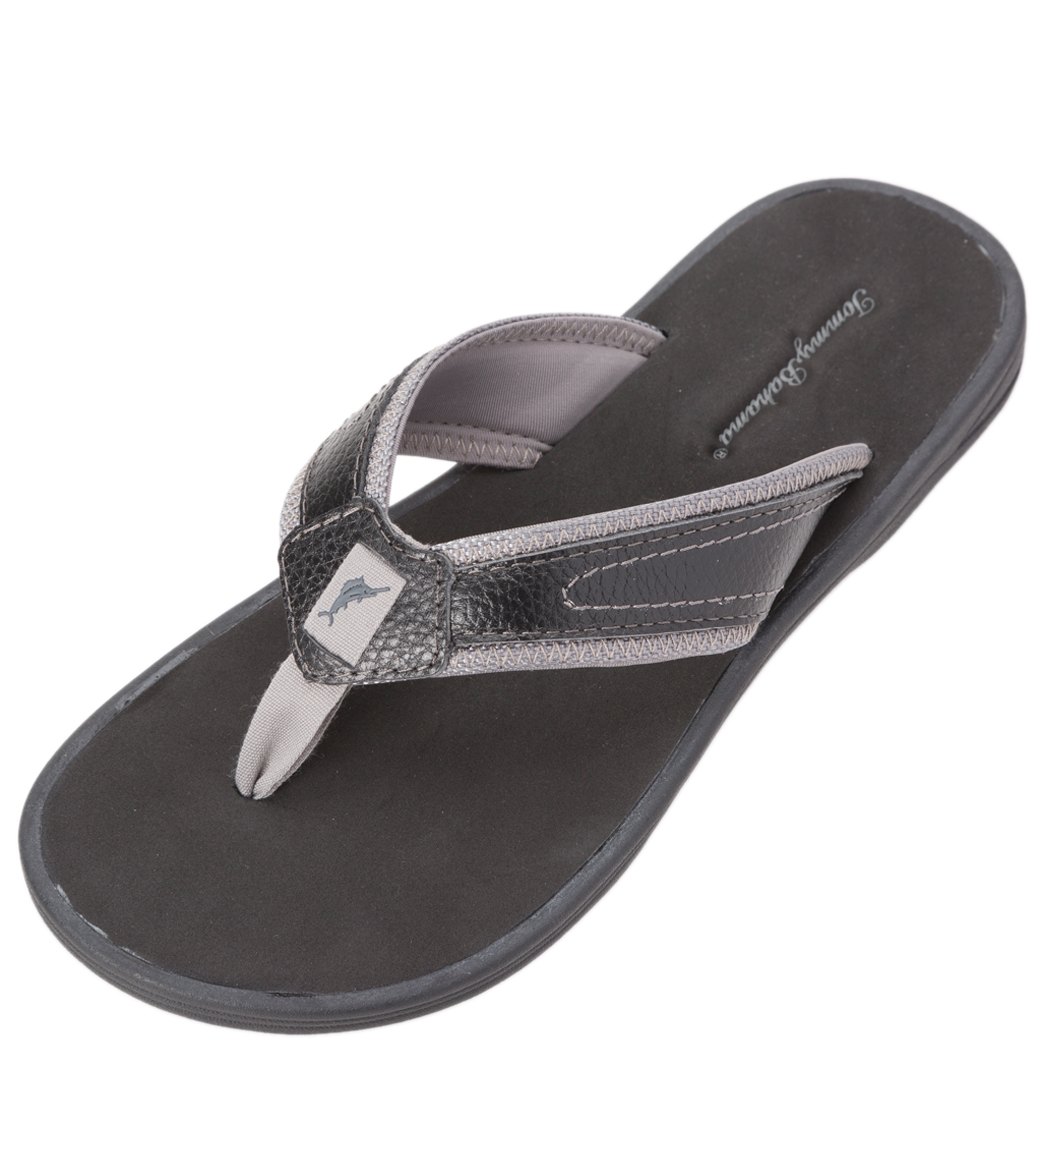 Buy > tommy bahama mens slippers > in stock